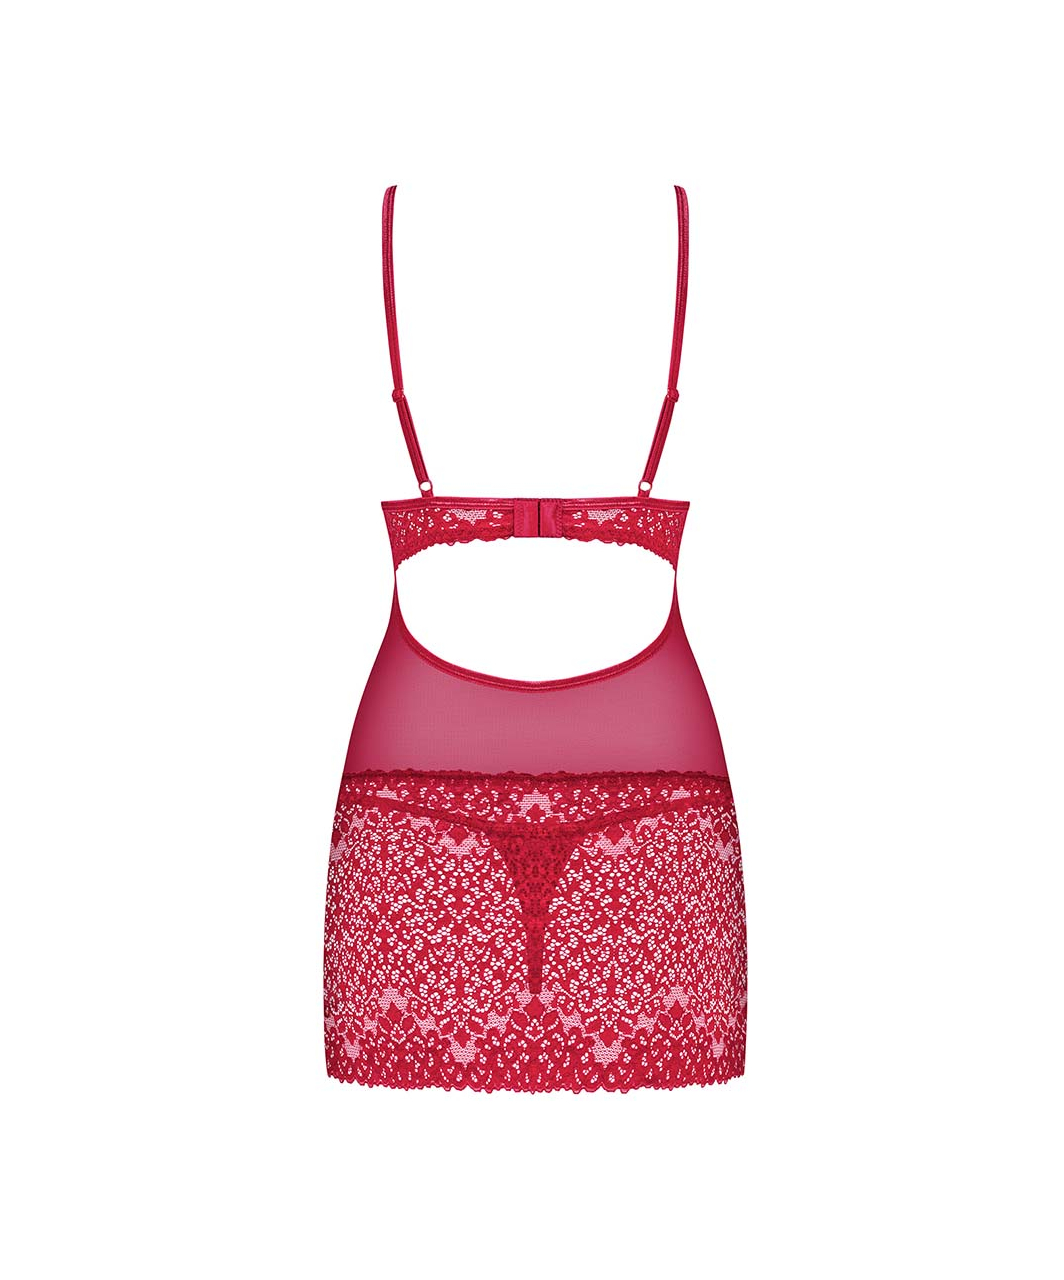 Obsessive Lividia Red Sheer Chemise with Lace